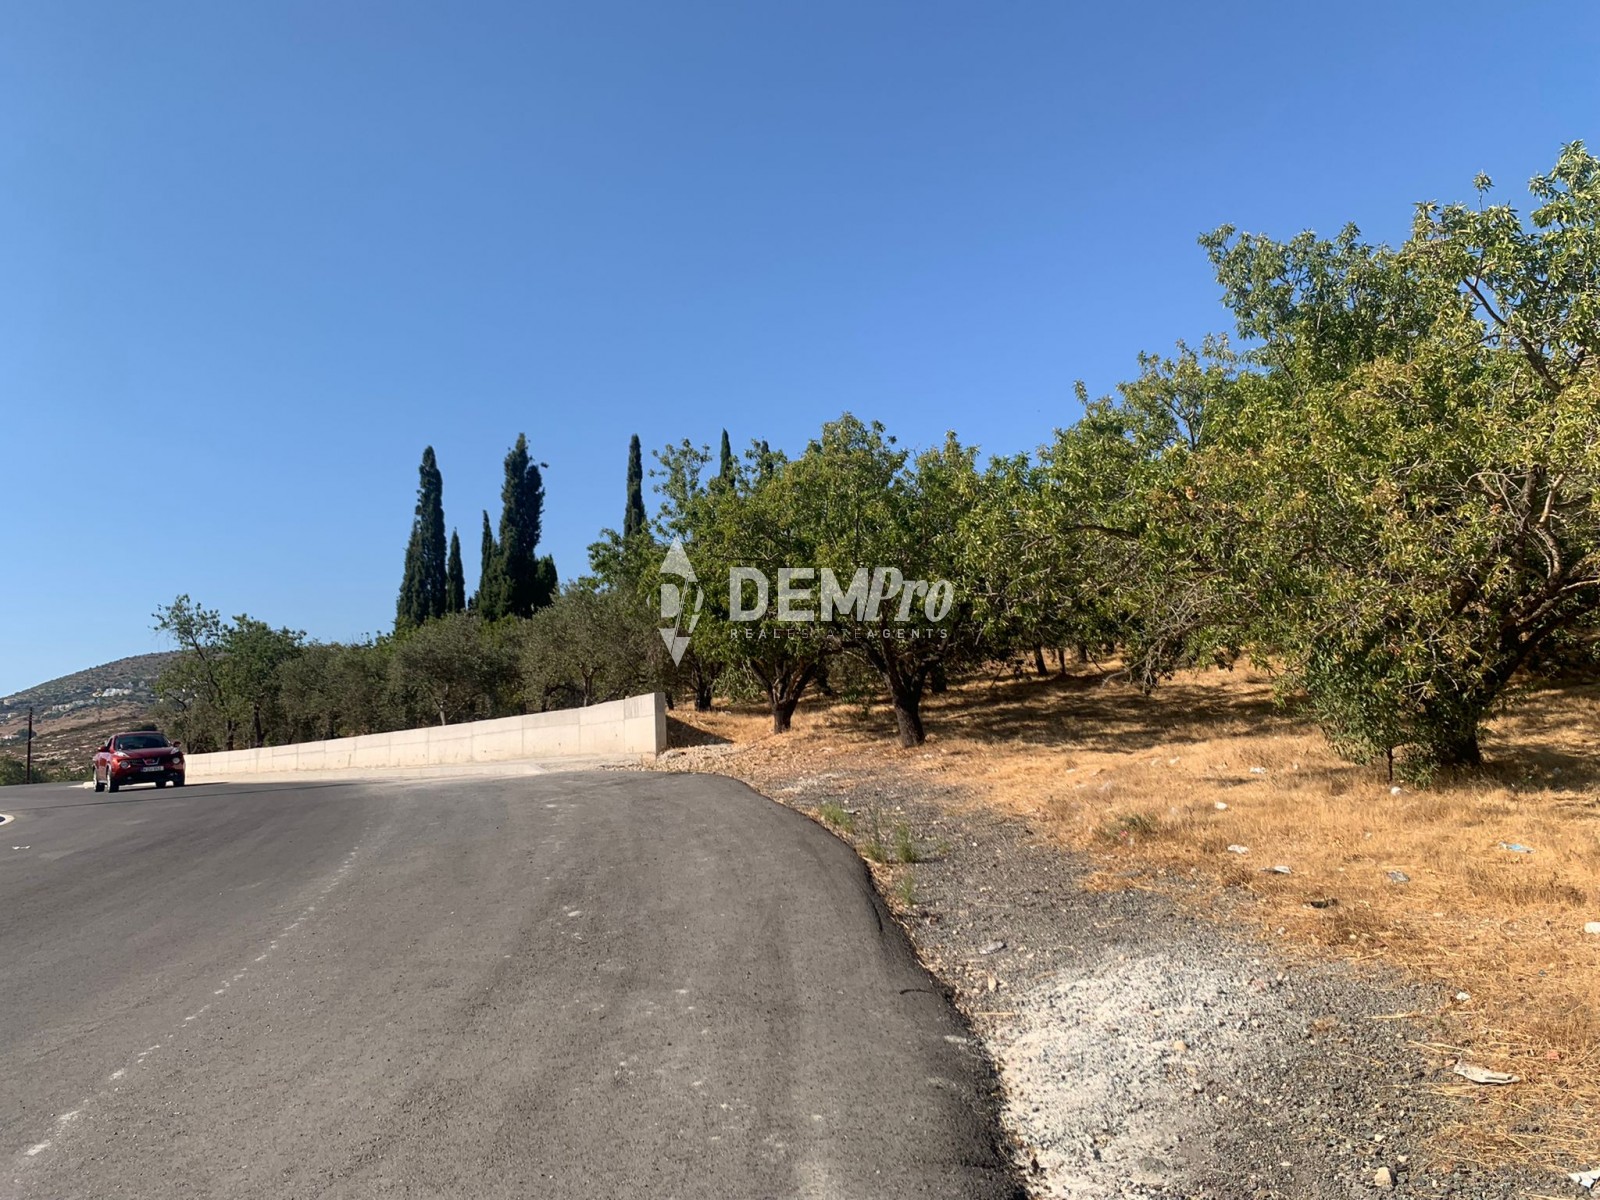 Agricultural Land For Sale in Mesogi, Paphos - DP3549